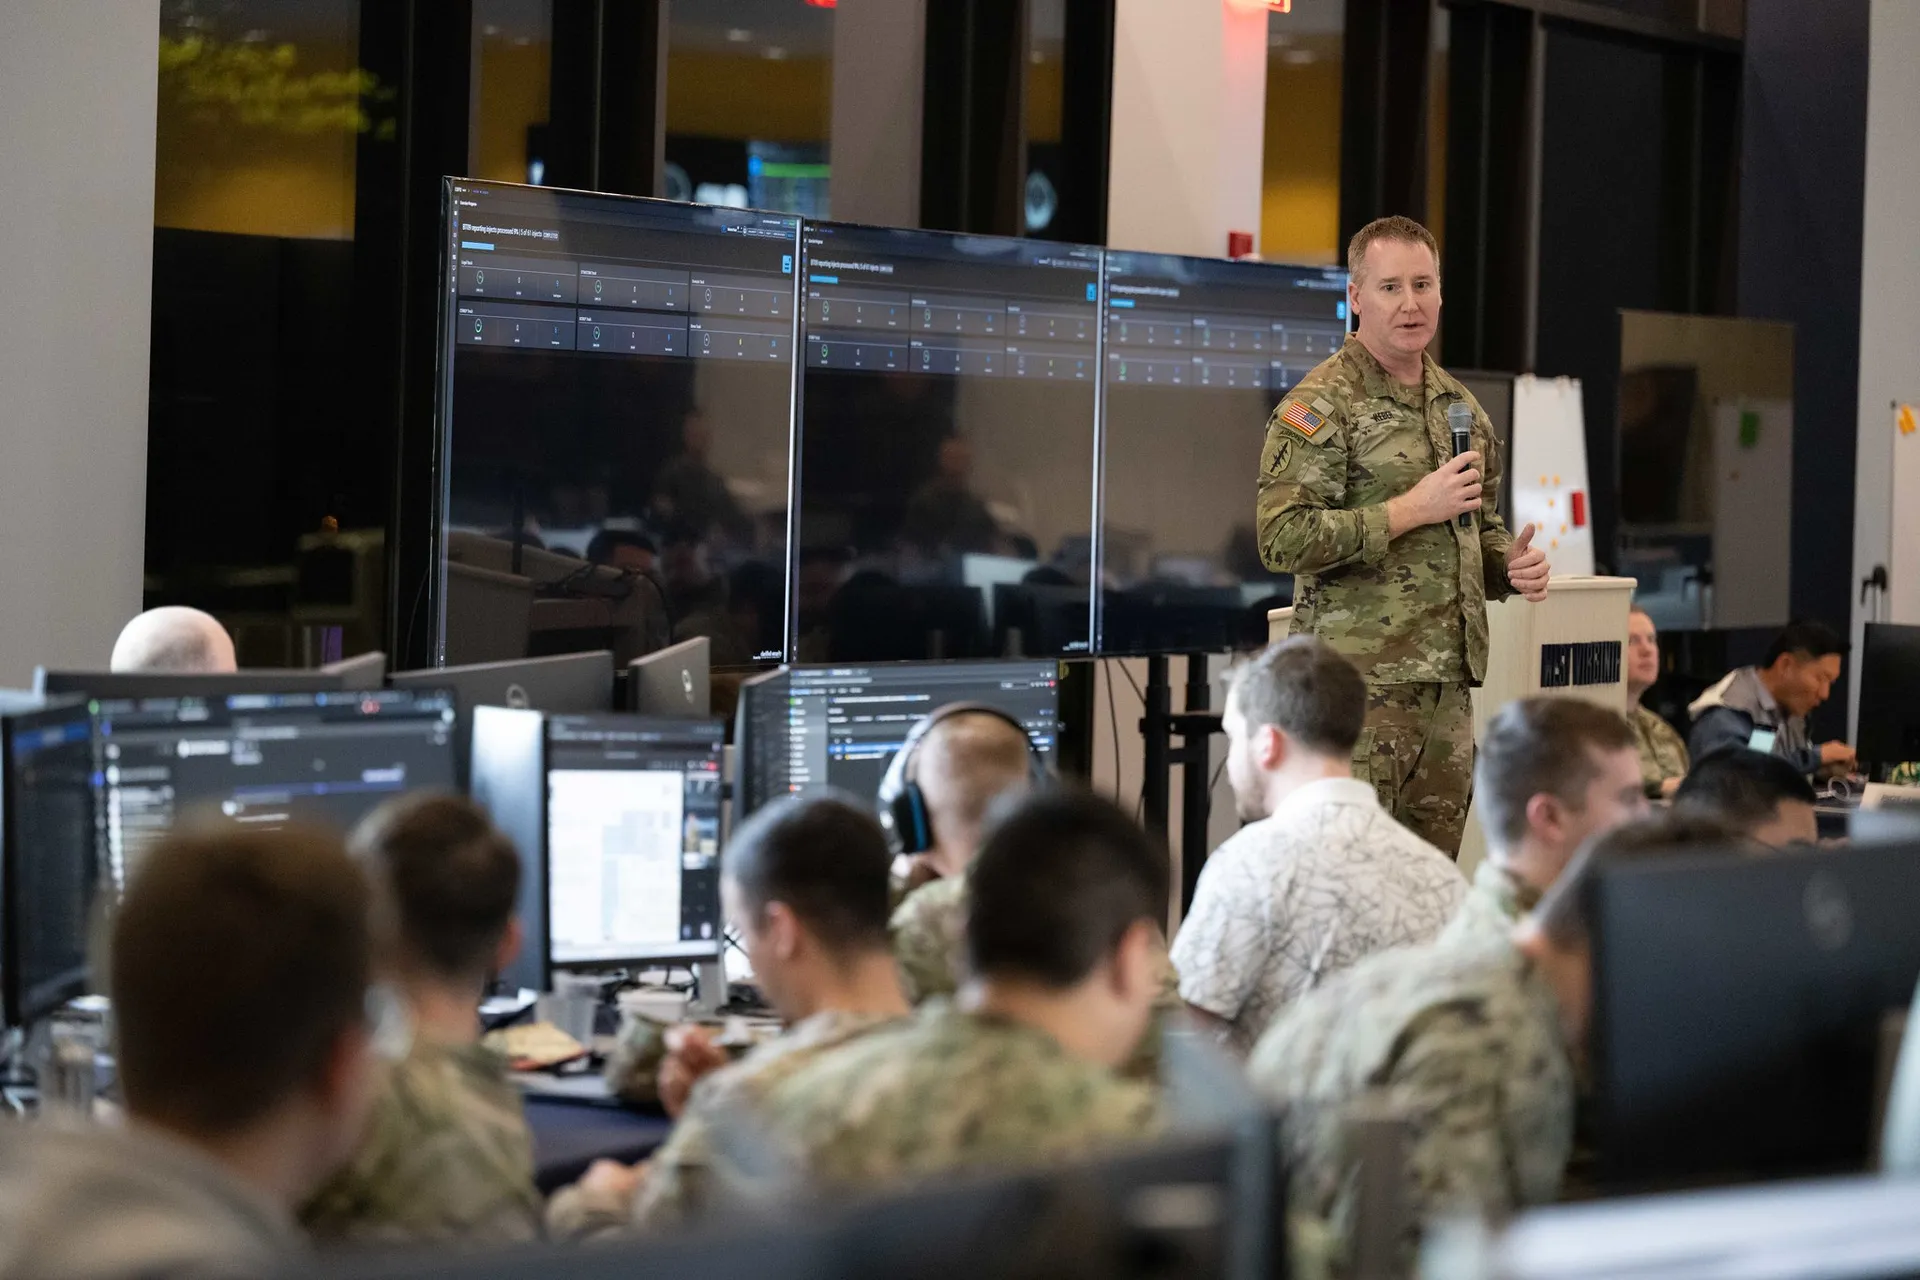 Lessons from LOCKED SHIELDS 2024 cyber exercise